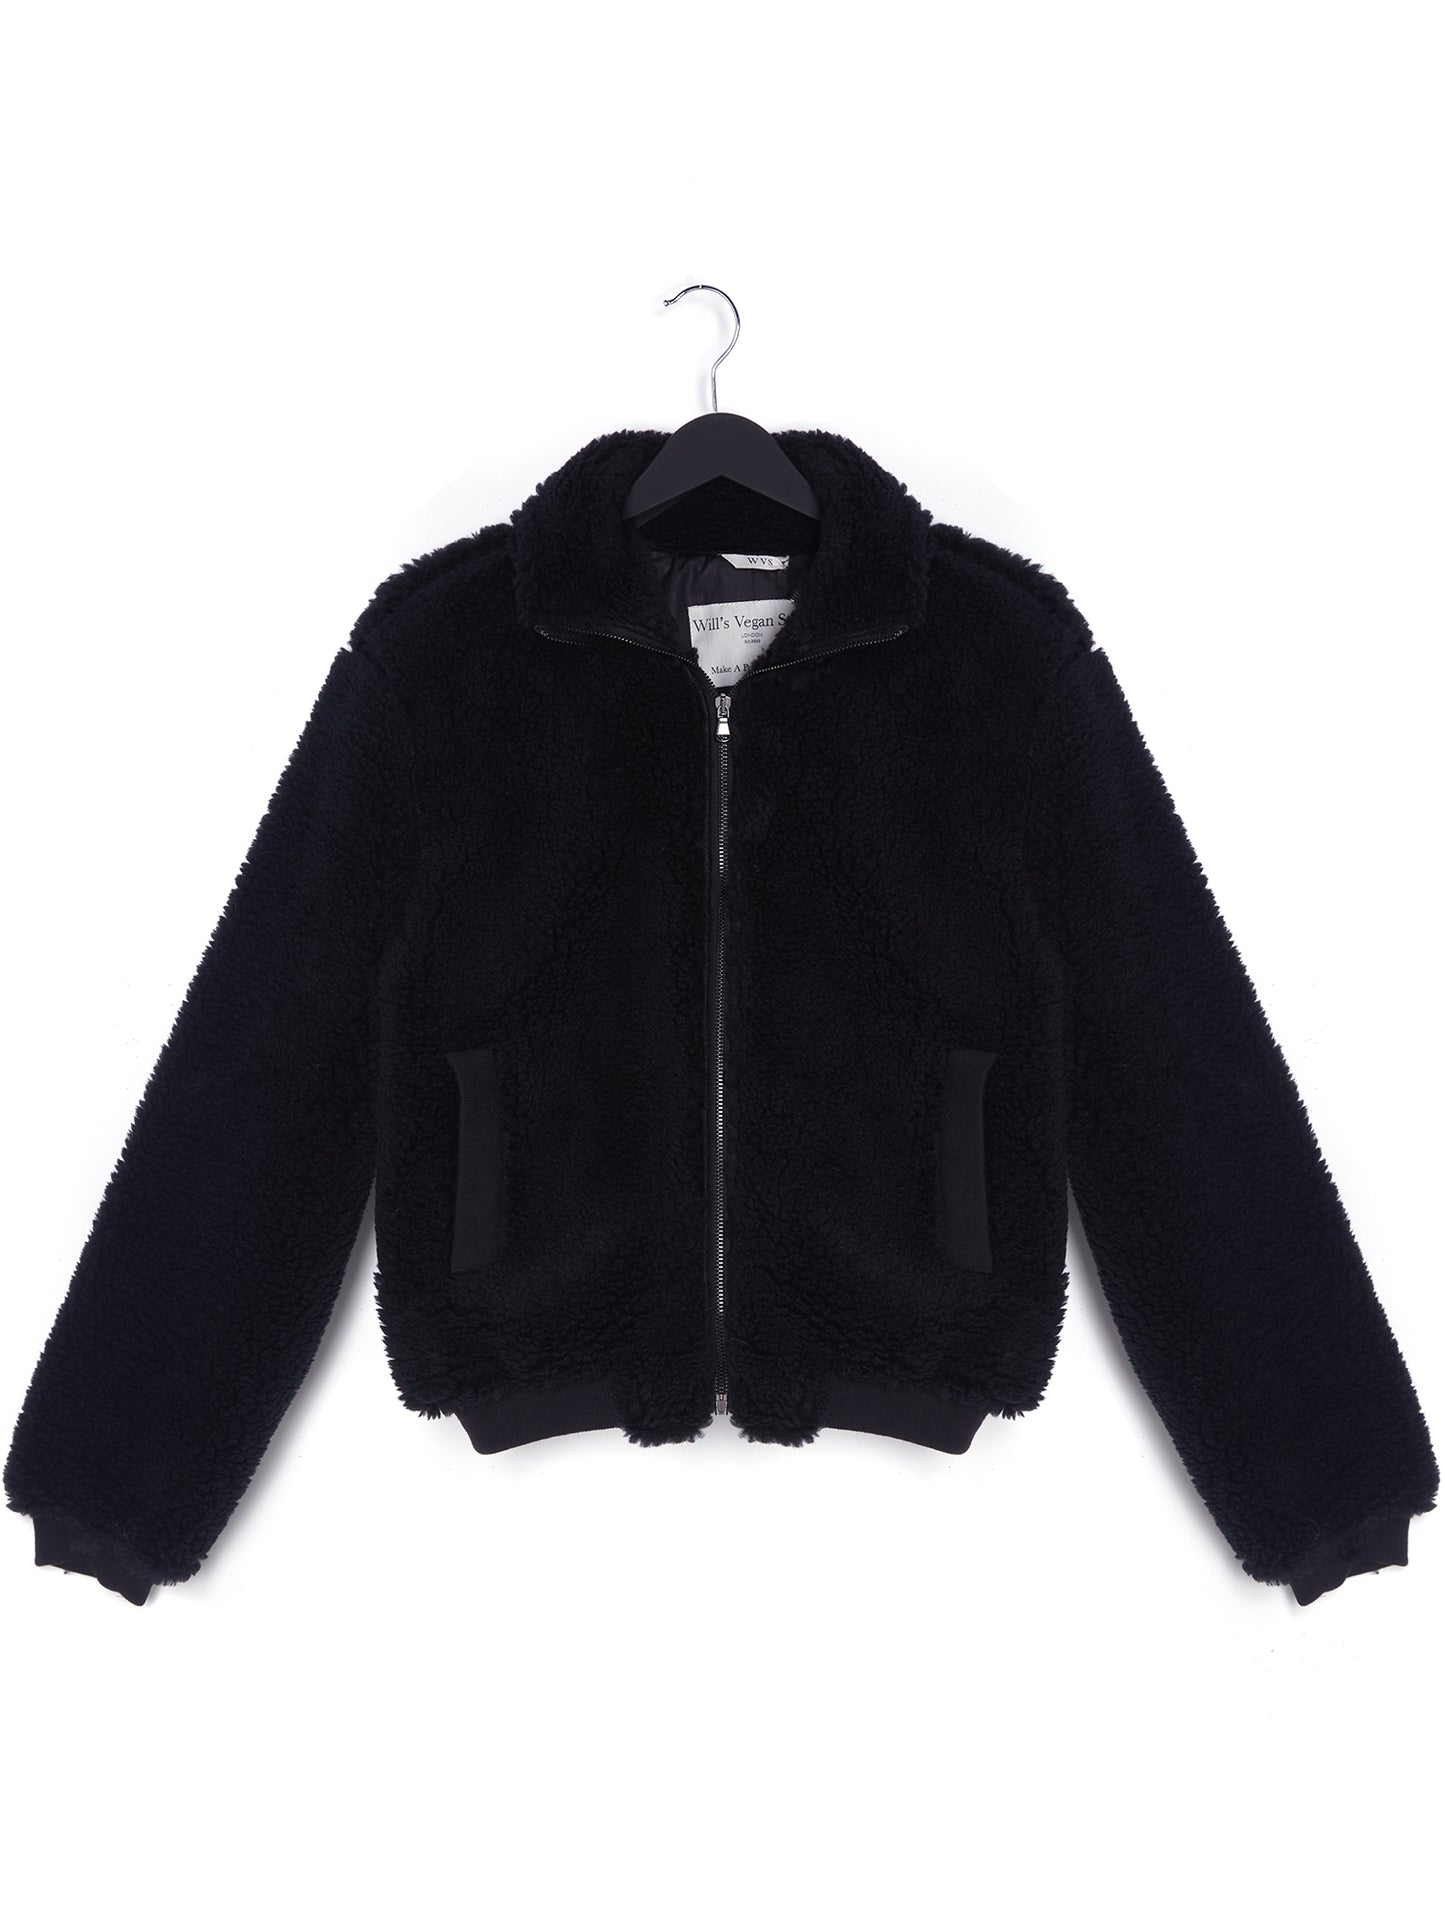 Recycled Zip Up Teddy Jacket